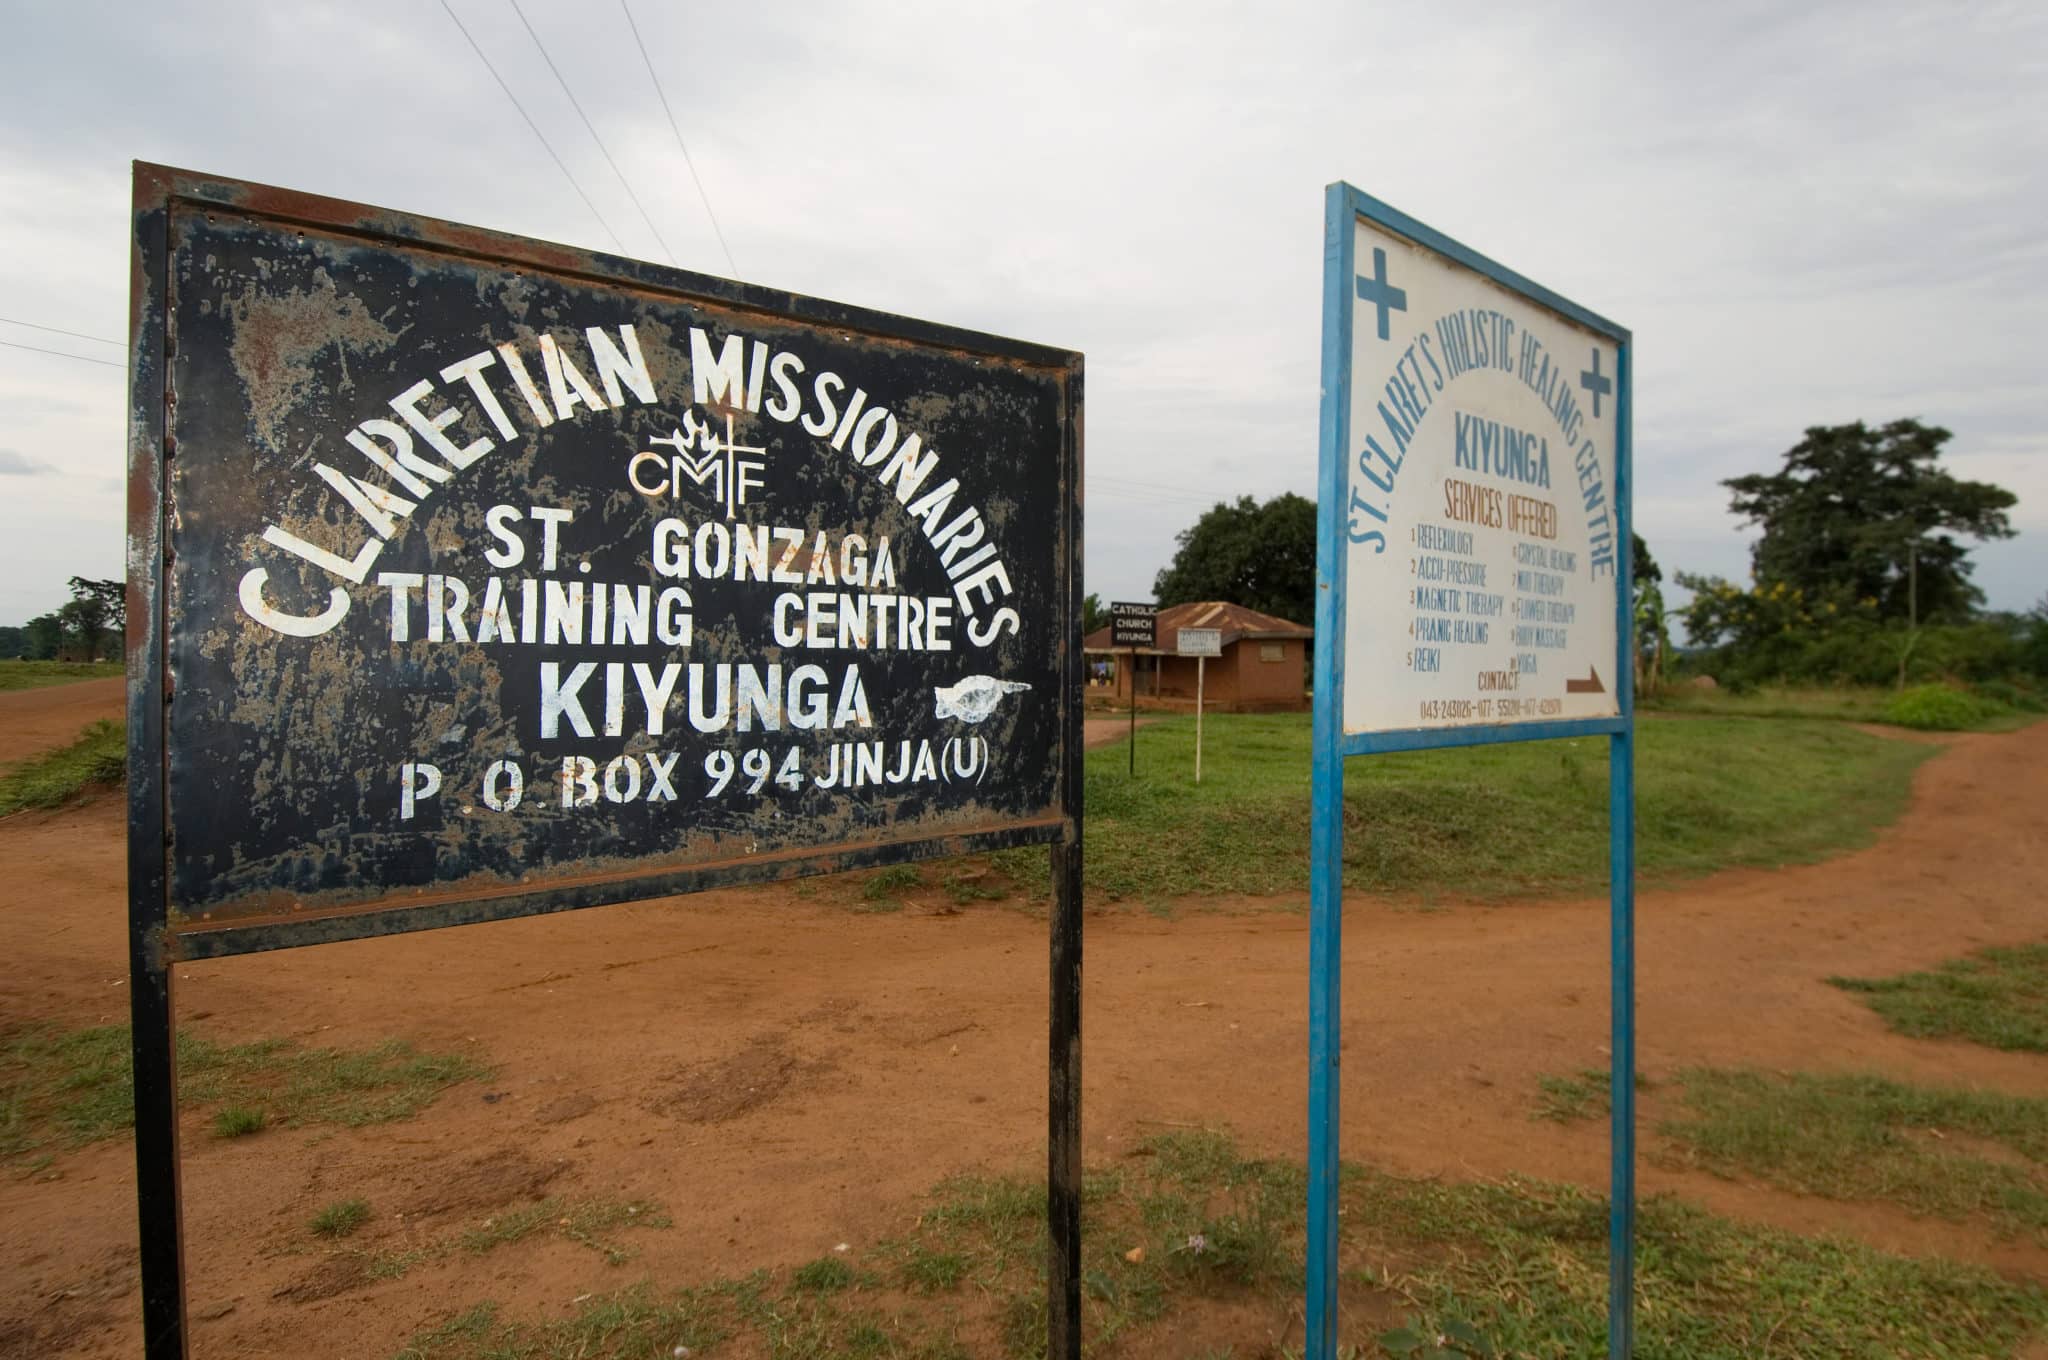 Signs on the main road direct parishioners to the Kiyunga parish and the other services available through the site. Established in Kiyunga in 1997, the Claretians now have tow full time priests in Kiyunga, in eastern Uganda, and provide a range of services through the parish, including a training center for lay church leaders and a holistic healing center.